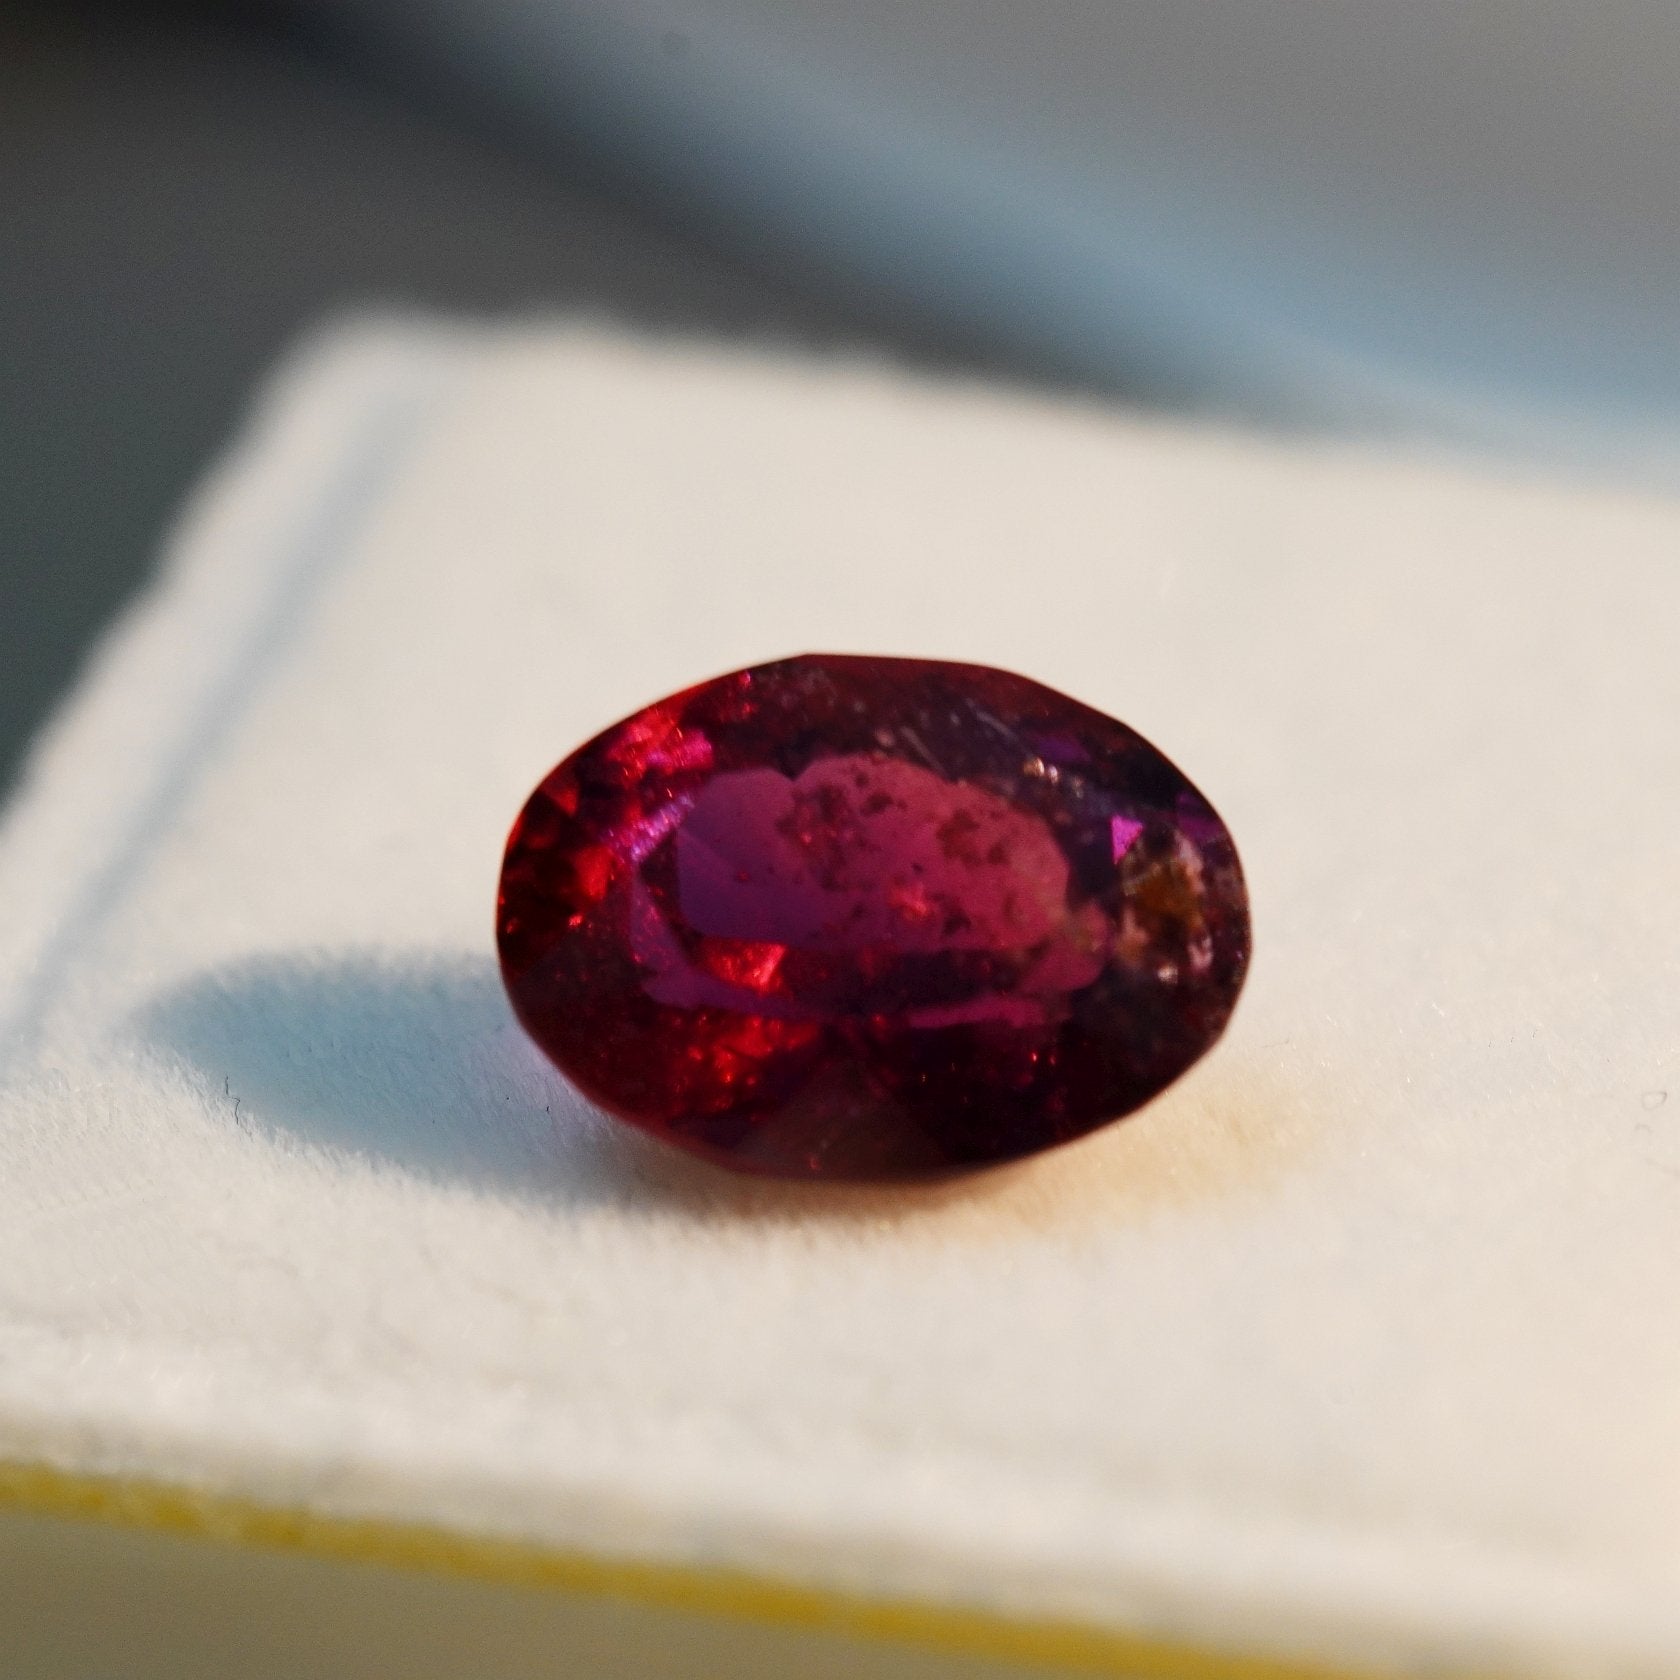 2.23Ct Winza Sapphire Tanzania Untreated Unheated - Stone Has Both Blue And Red In It Is Color